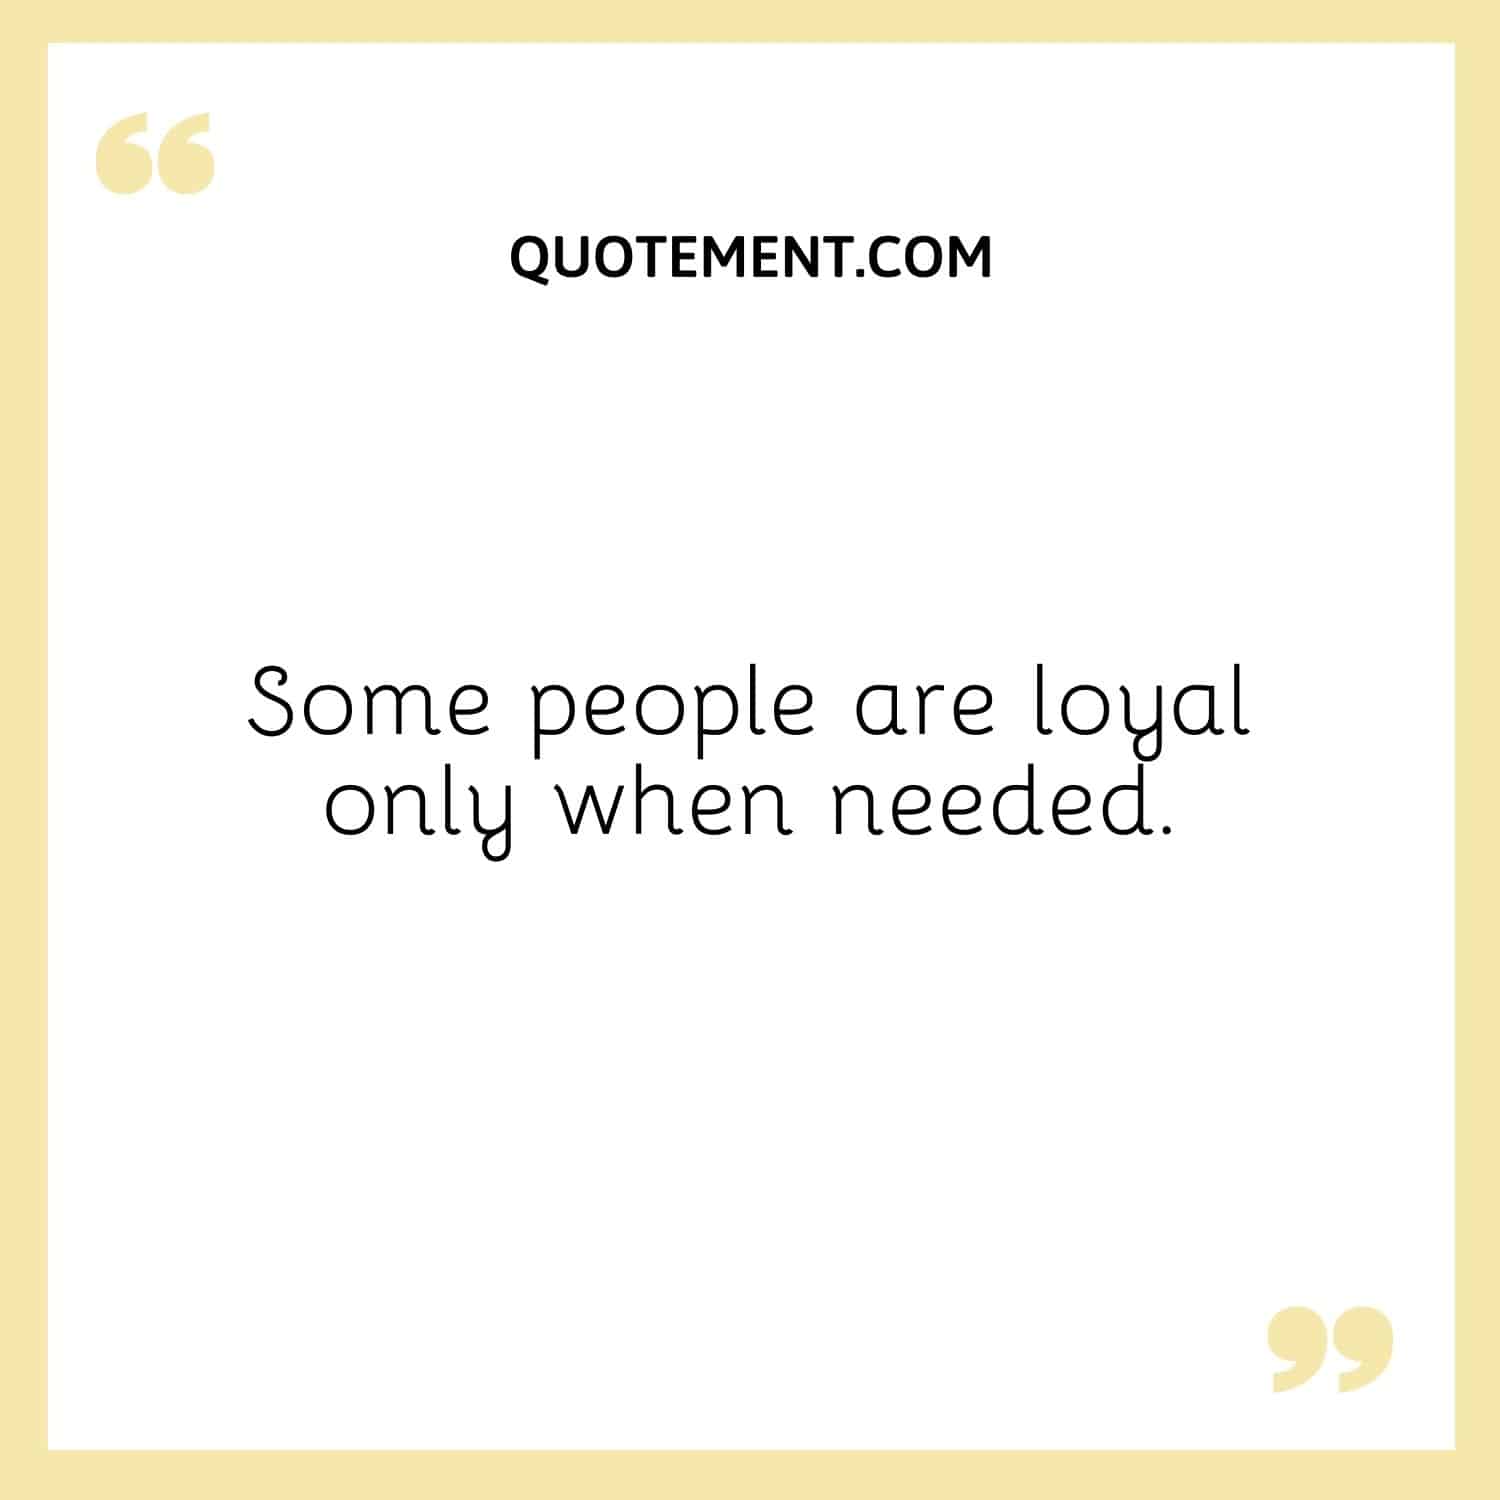 Some people are loyal only when needed.